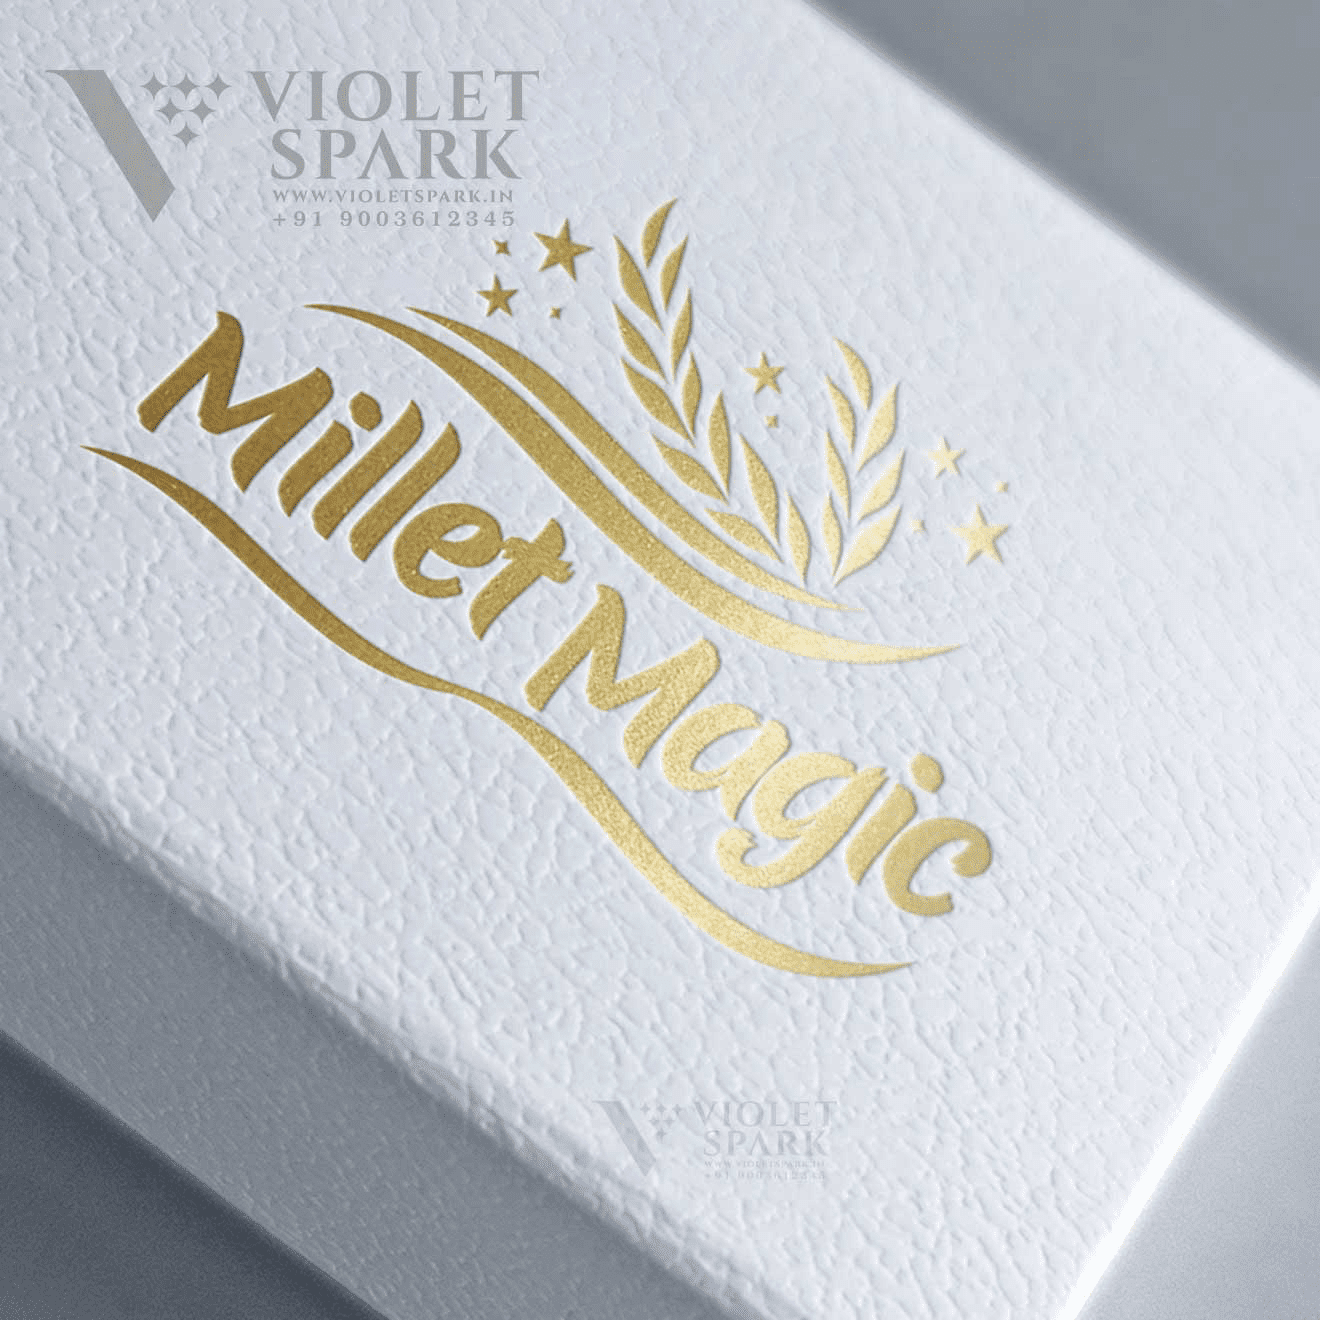 Millet Magic Gold Foil Printing Graphic Design, Branding Packaging Design in Erode by Creative Prints thecreativeprints